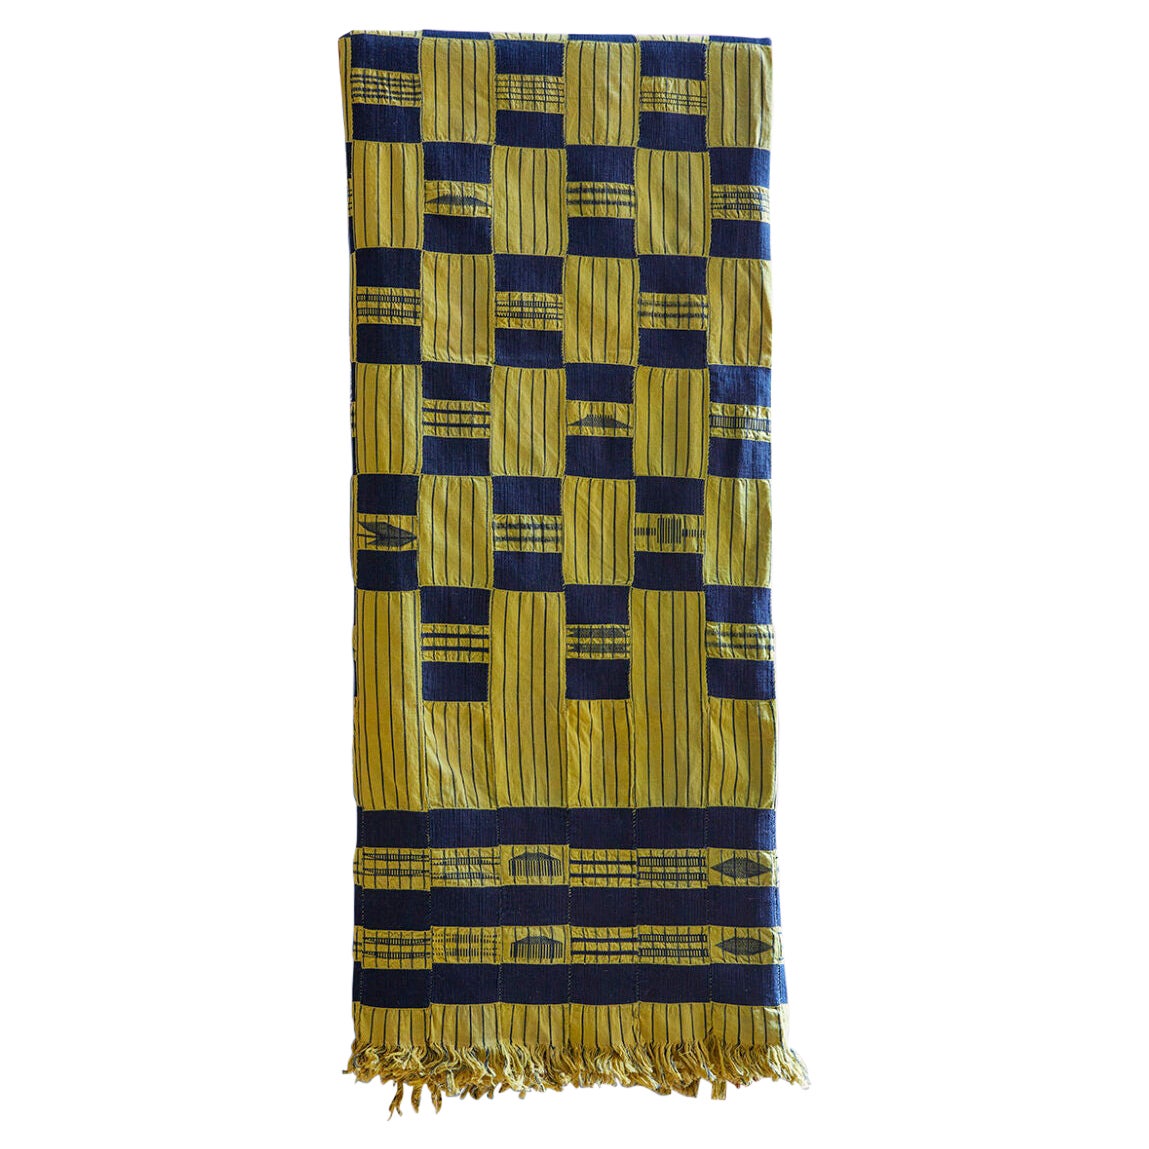 Vintage Ewe Kente Men’s Cloth in Blue and Yellow Striped Textile, Ghana 1950's